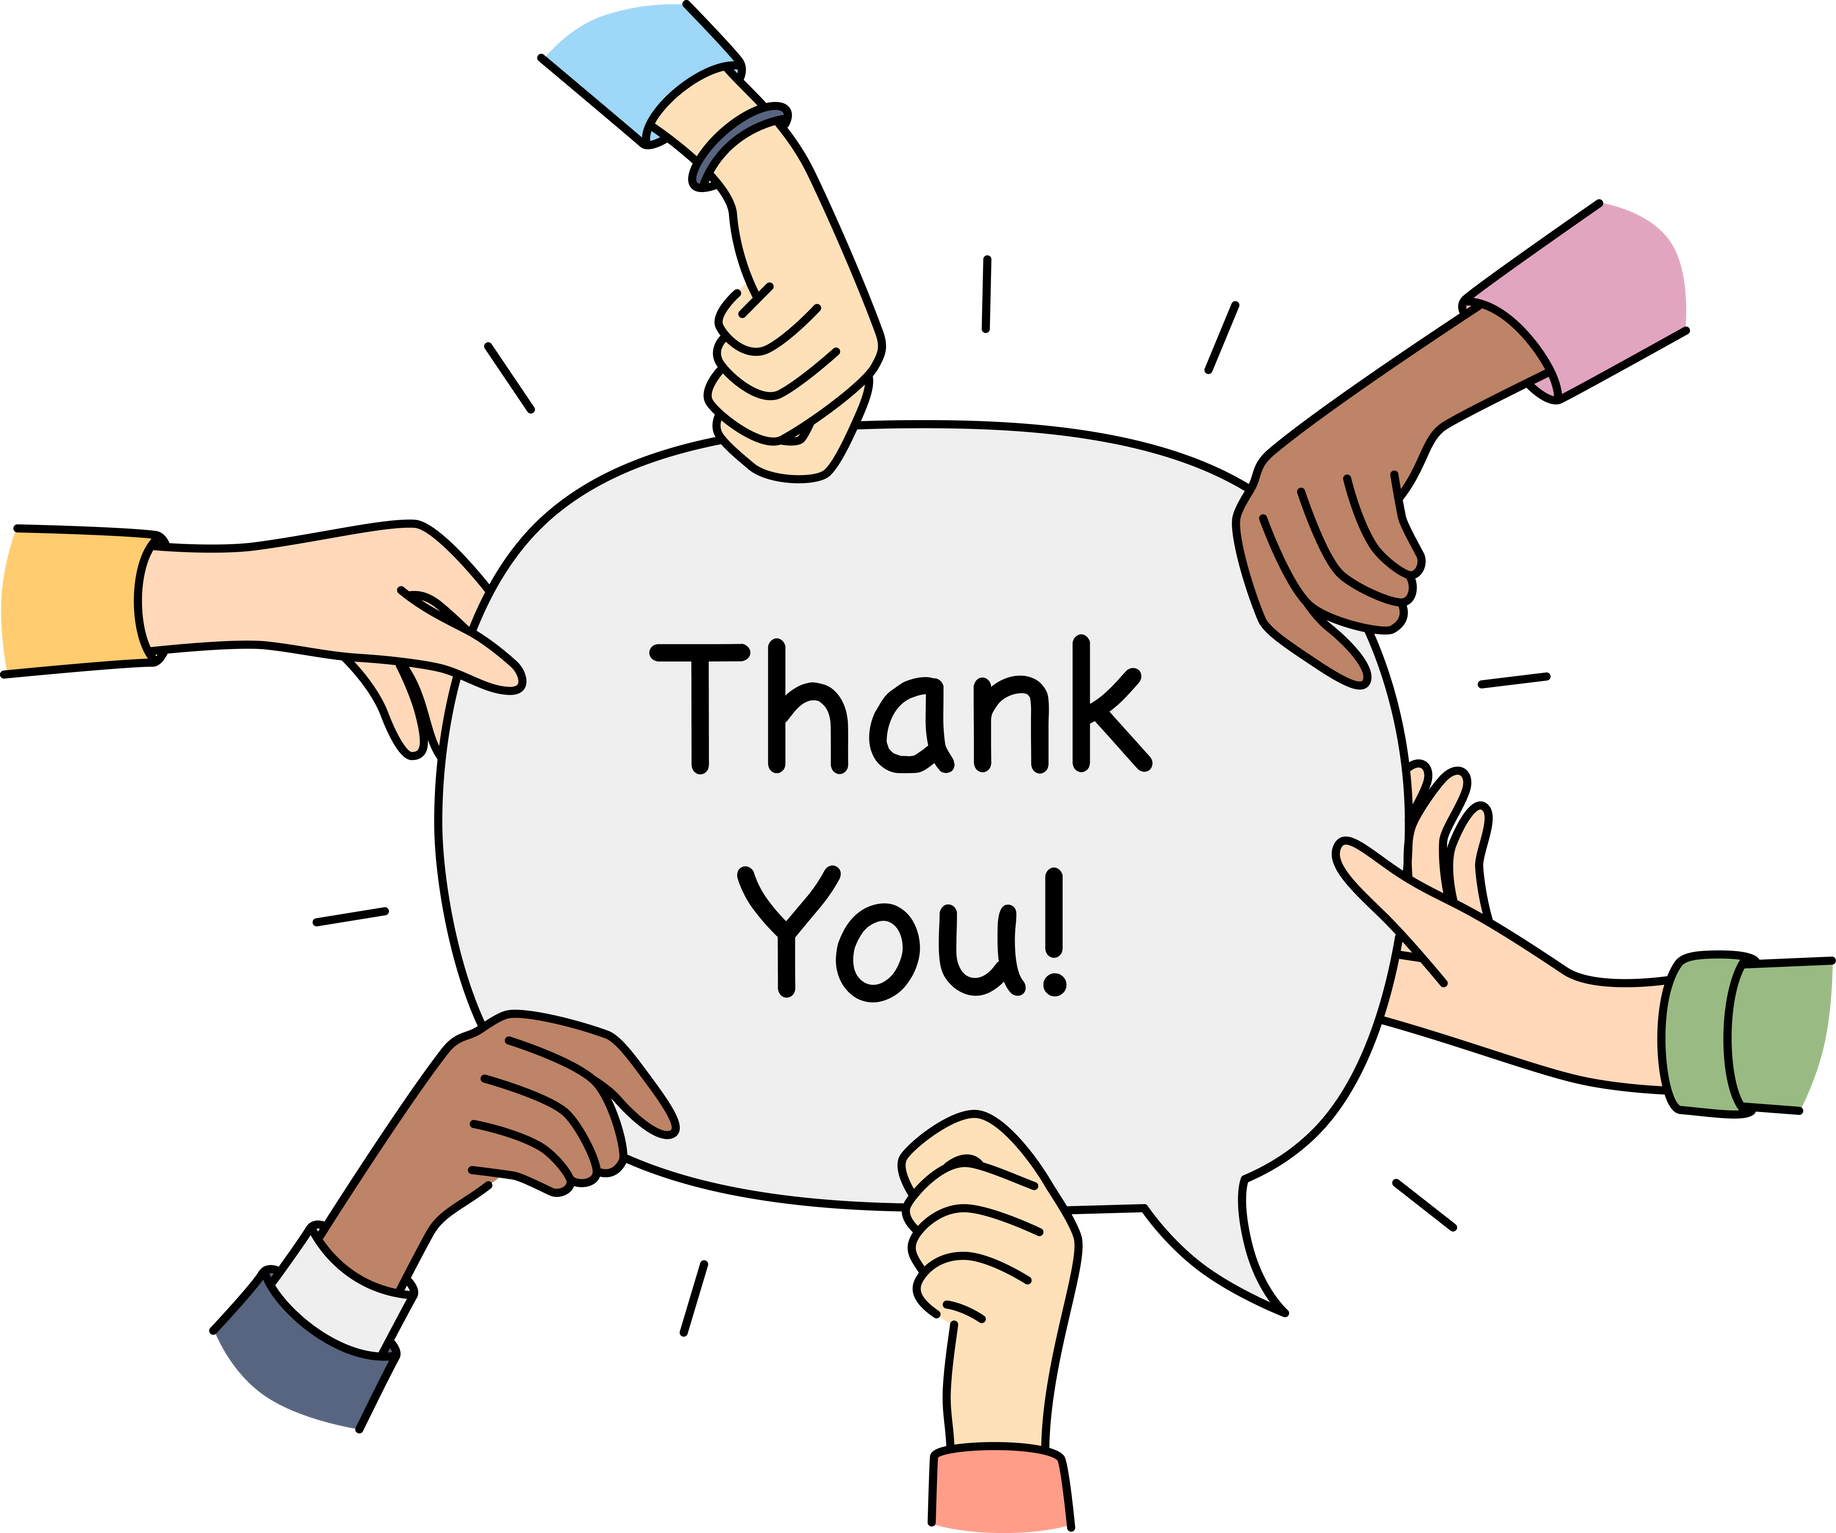 Diverse hands hold speech bubble with thank you